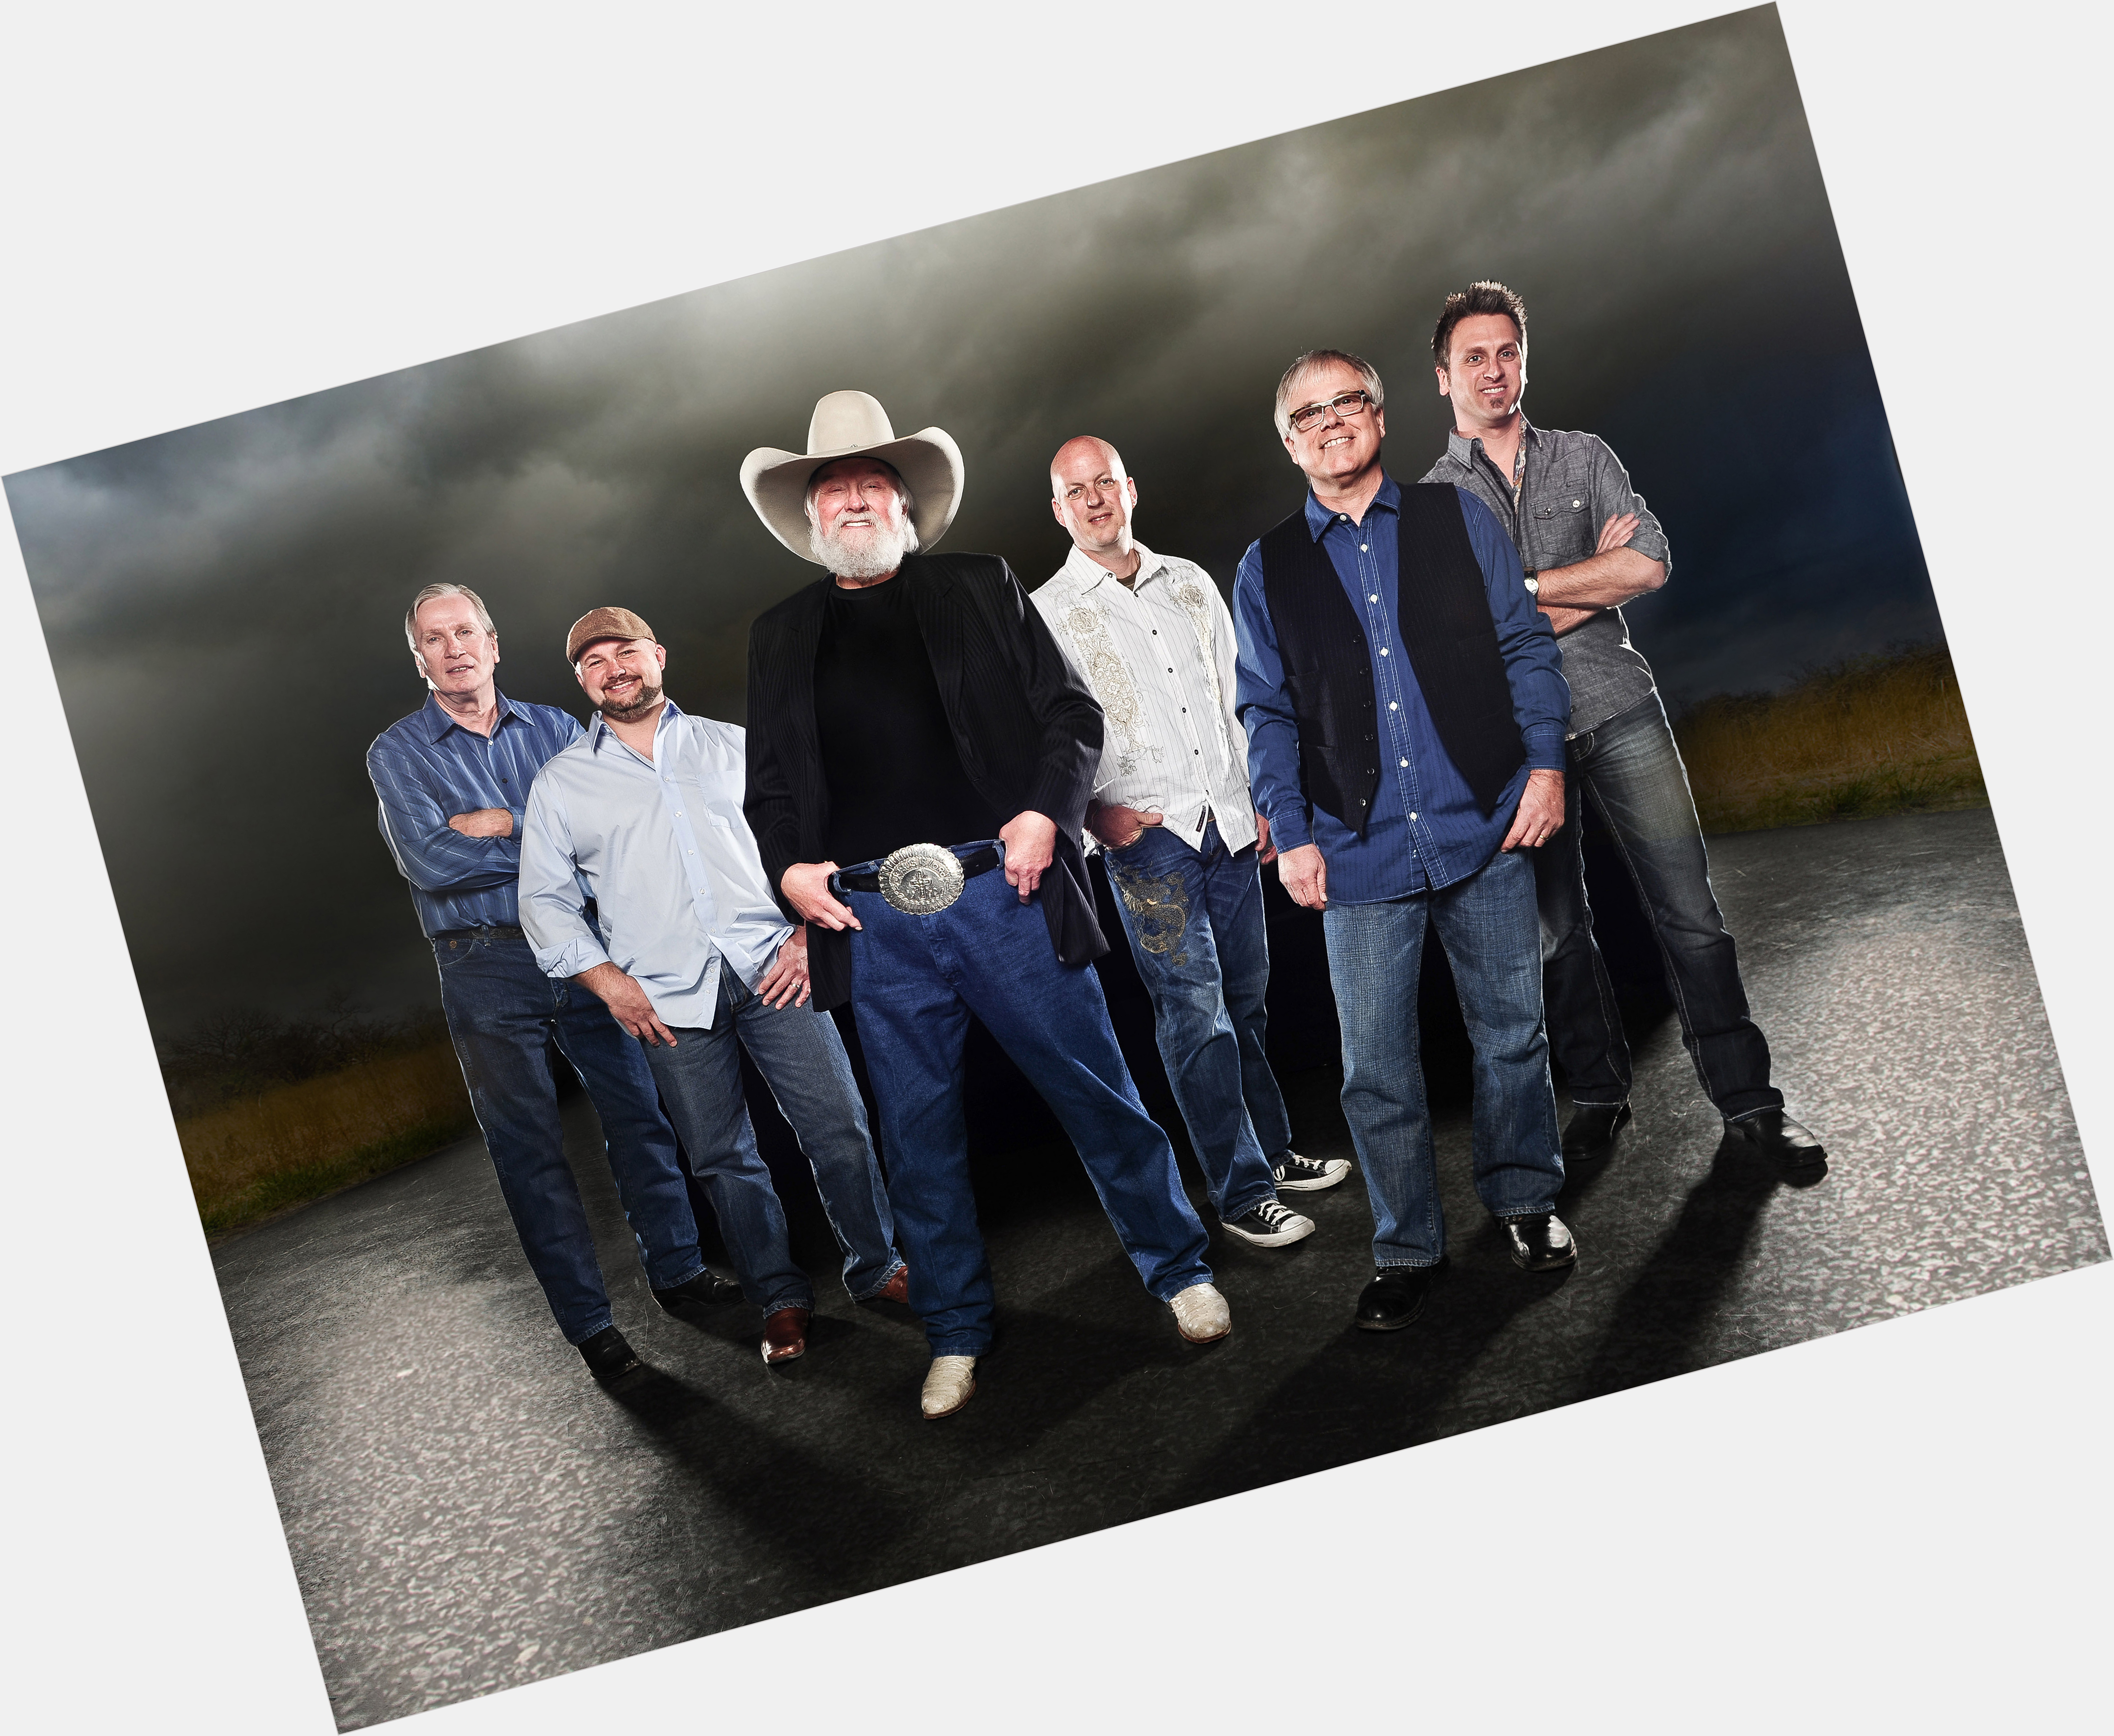 <a href="/hot-men/the-charlie-daniels-band/is-he-where-playing-what-genre-world-needs">The Charlie Daniels Band</a>  